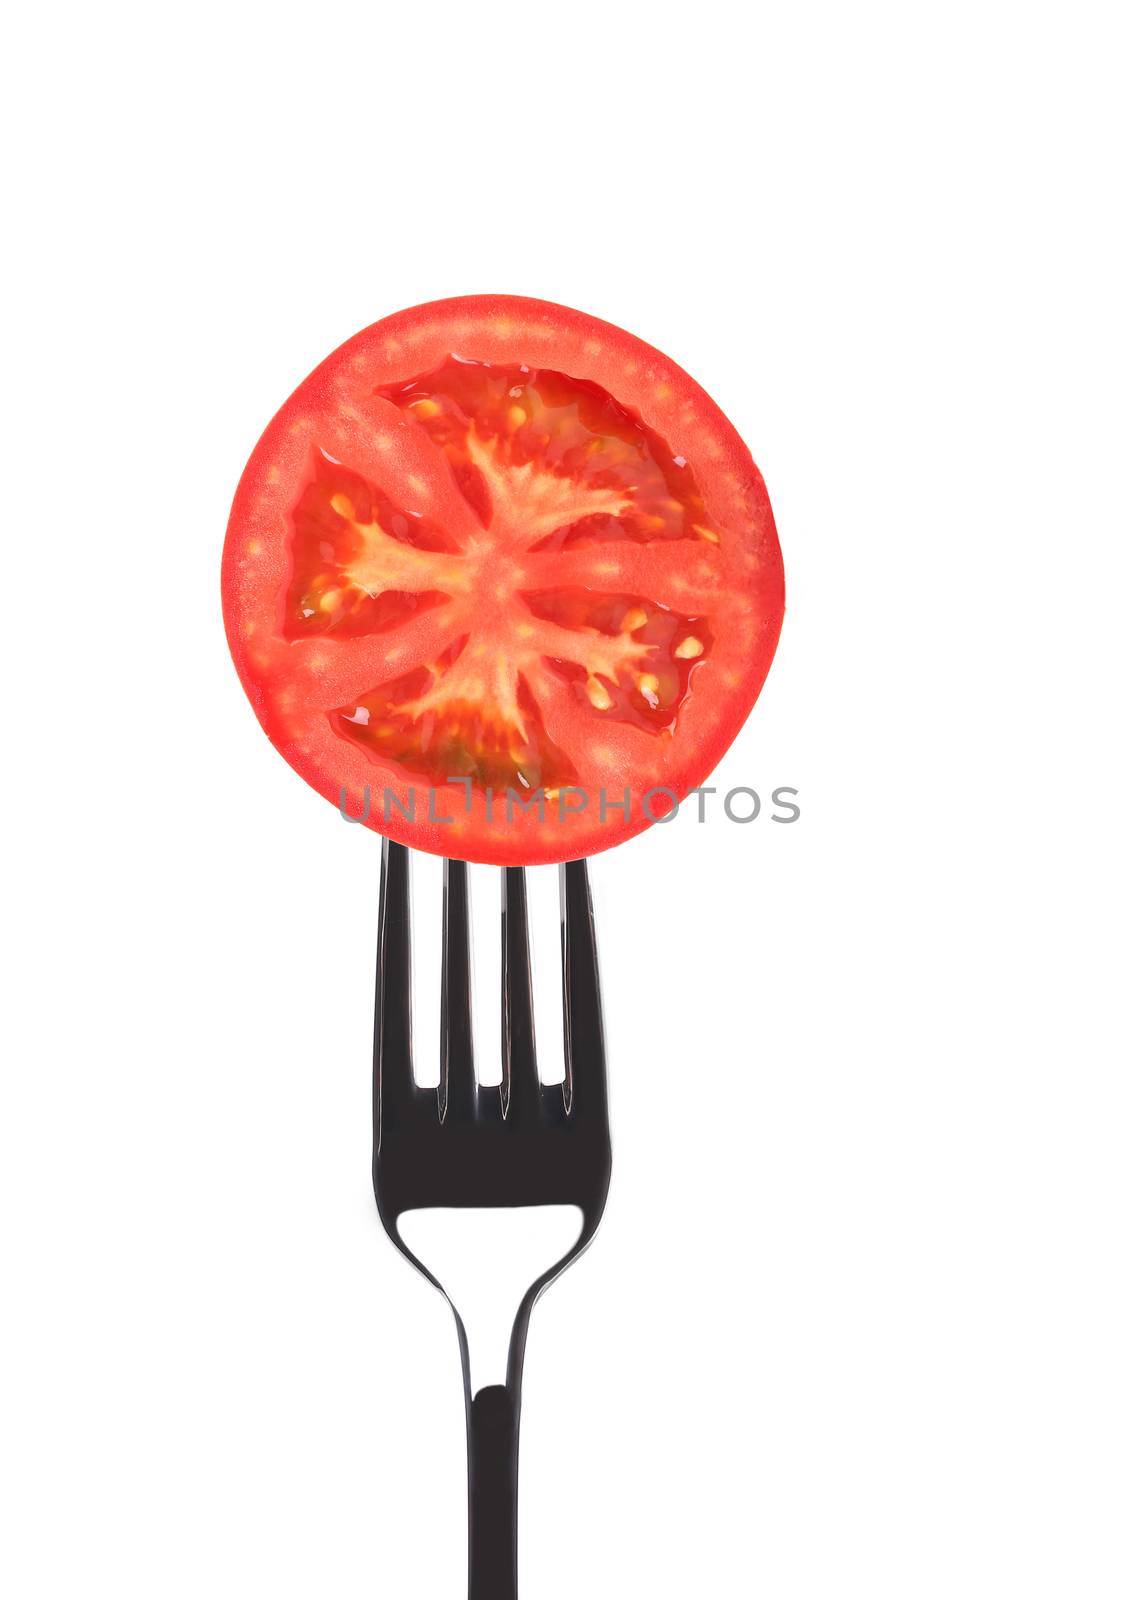 Red juicy tomato on fork. by indigolotos